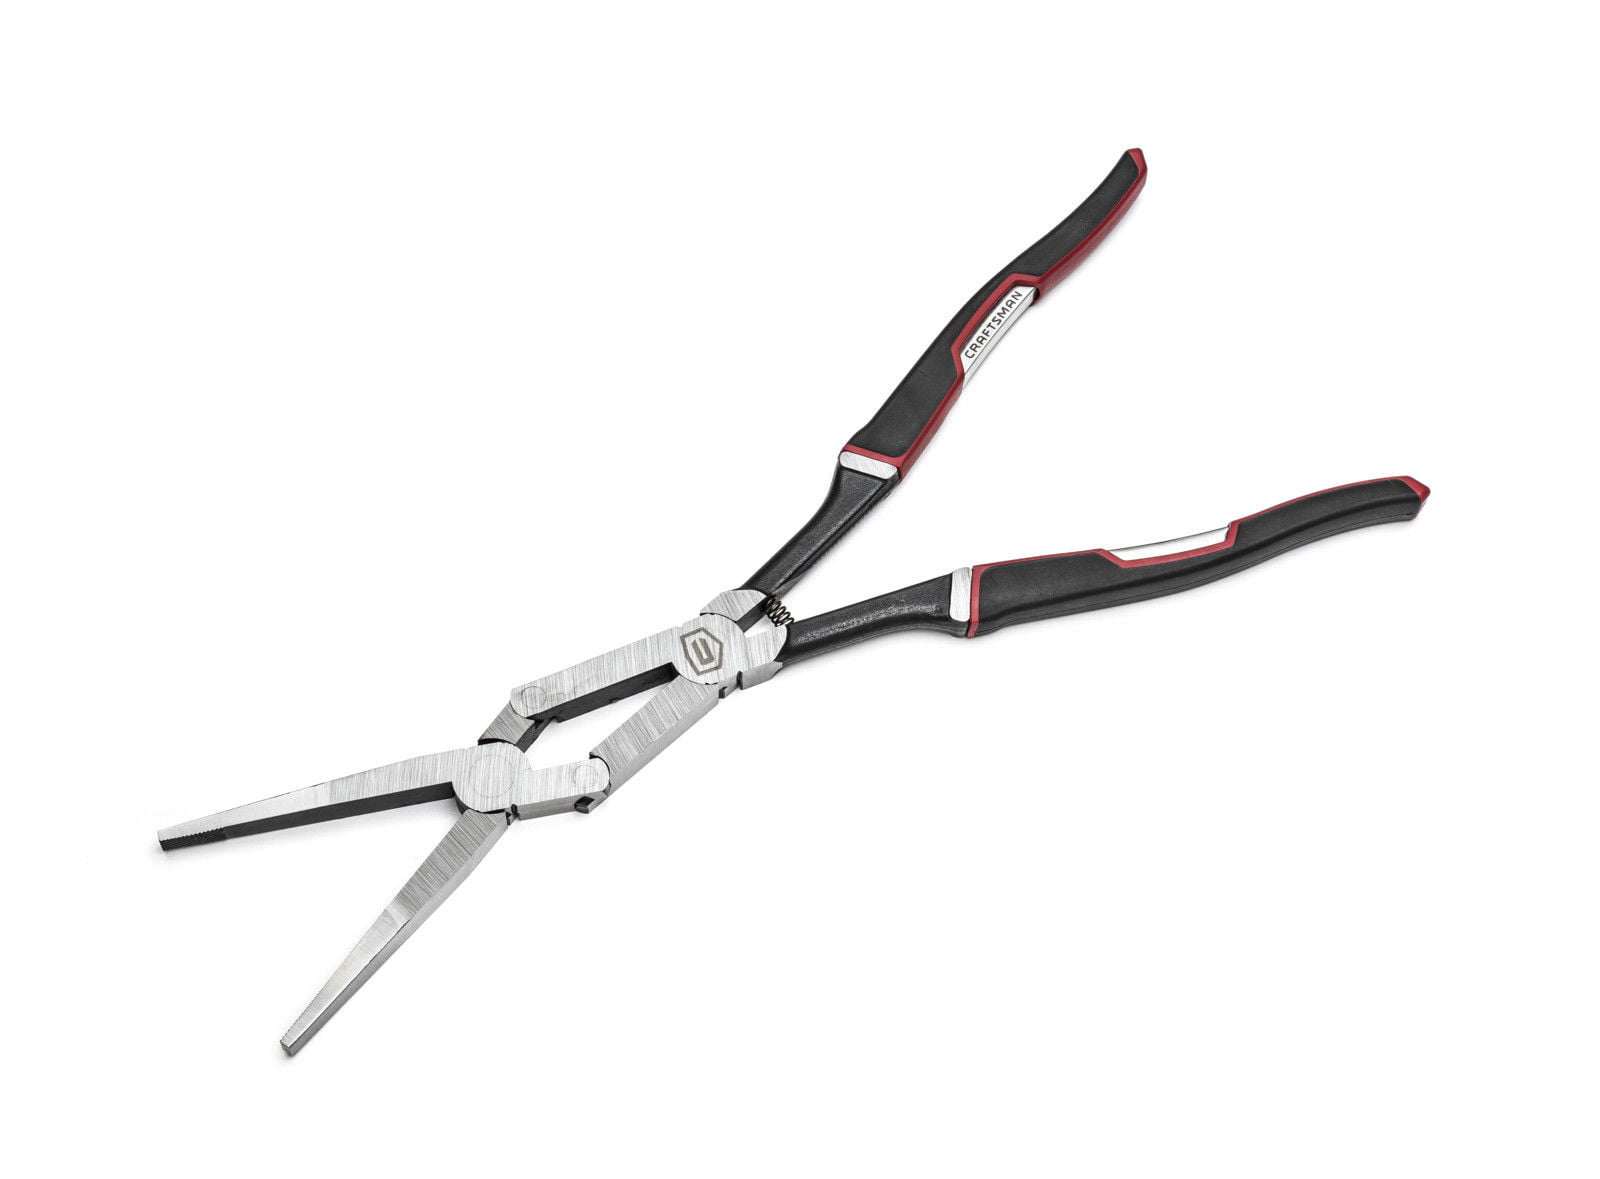 MacWork 6 inch Wire Twisting Pliers Aircraft Safety Wire Twist Locking  Pliers Garden Repair Tools Free Shipping